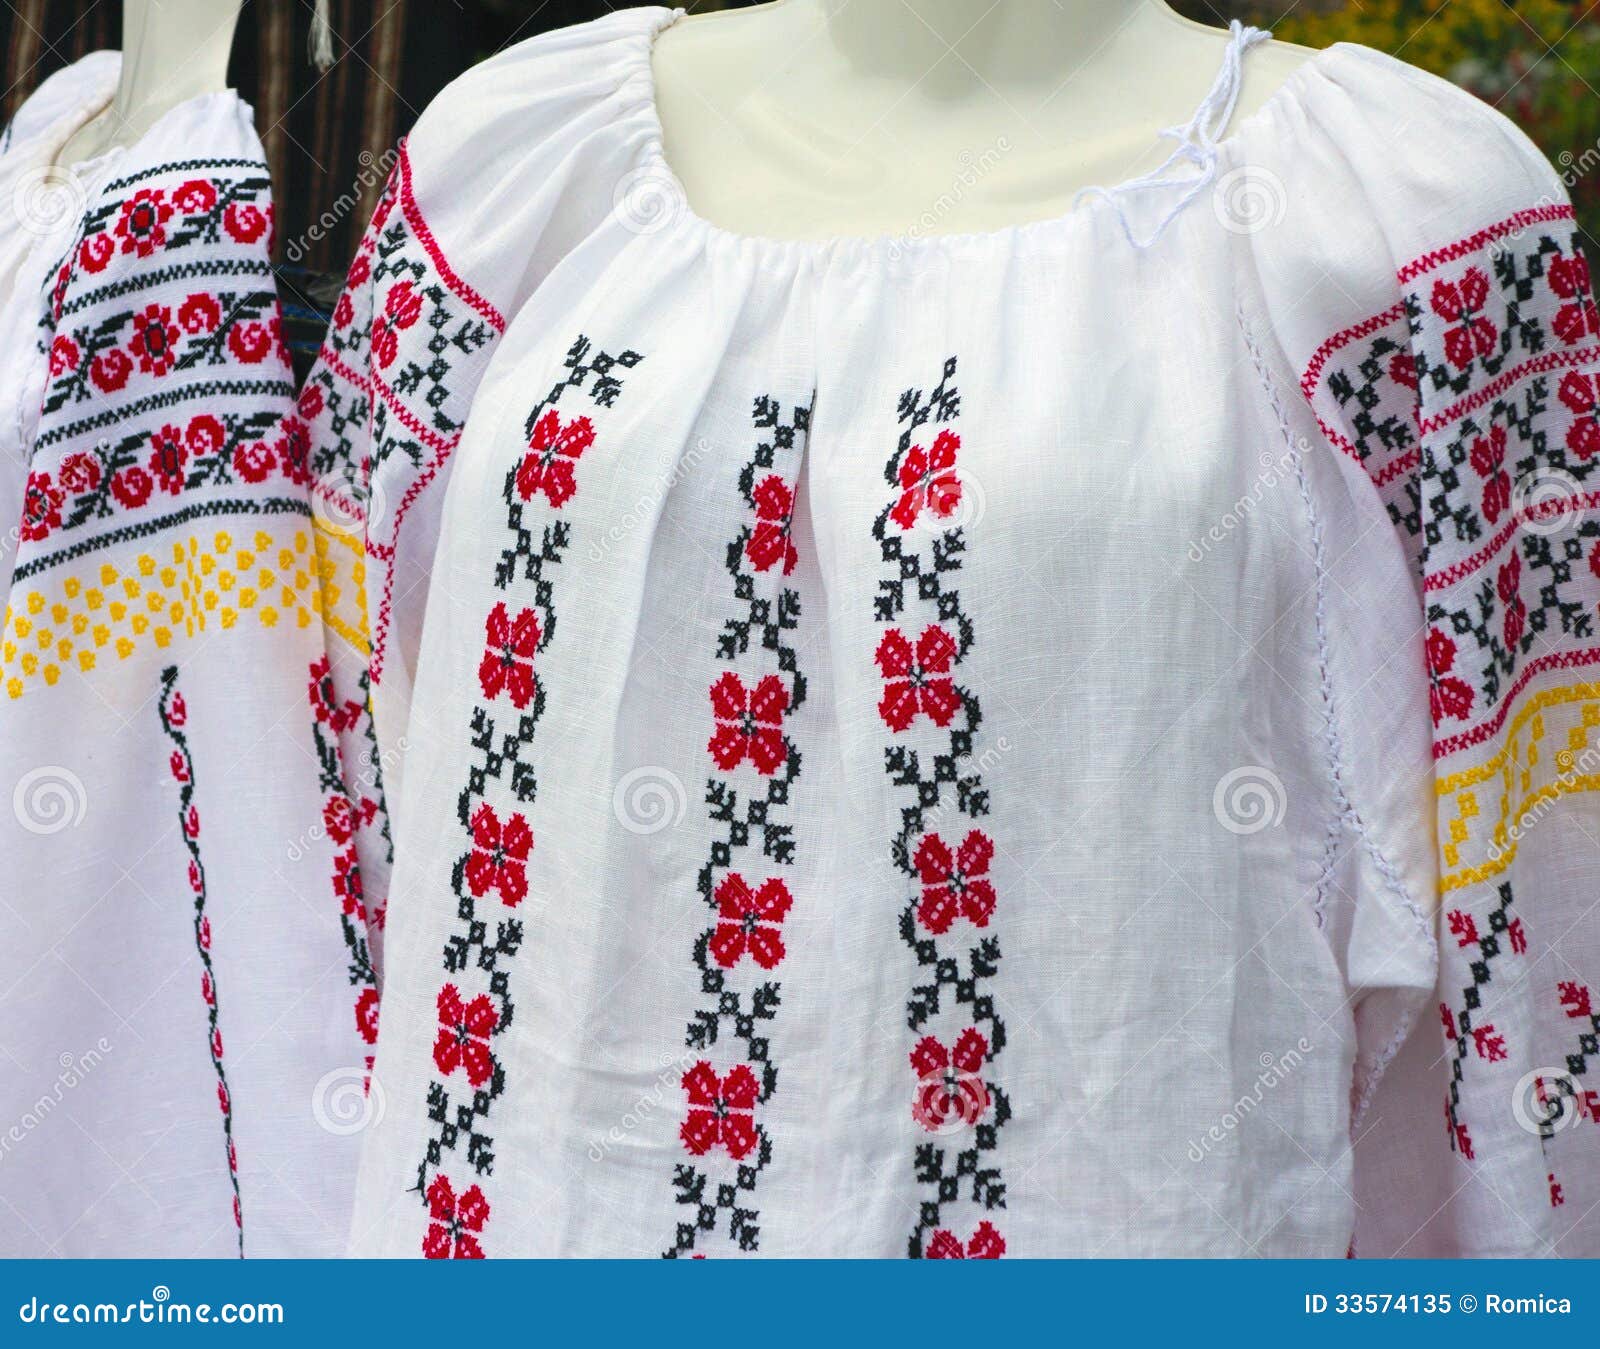 Balkan Embroidered National Traditional Costume Clothes Stock Image ...